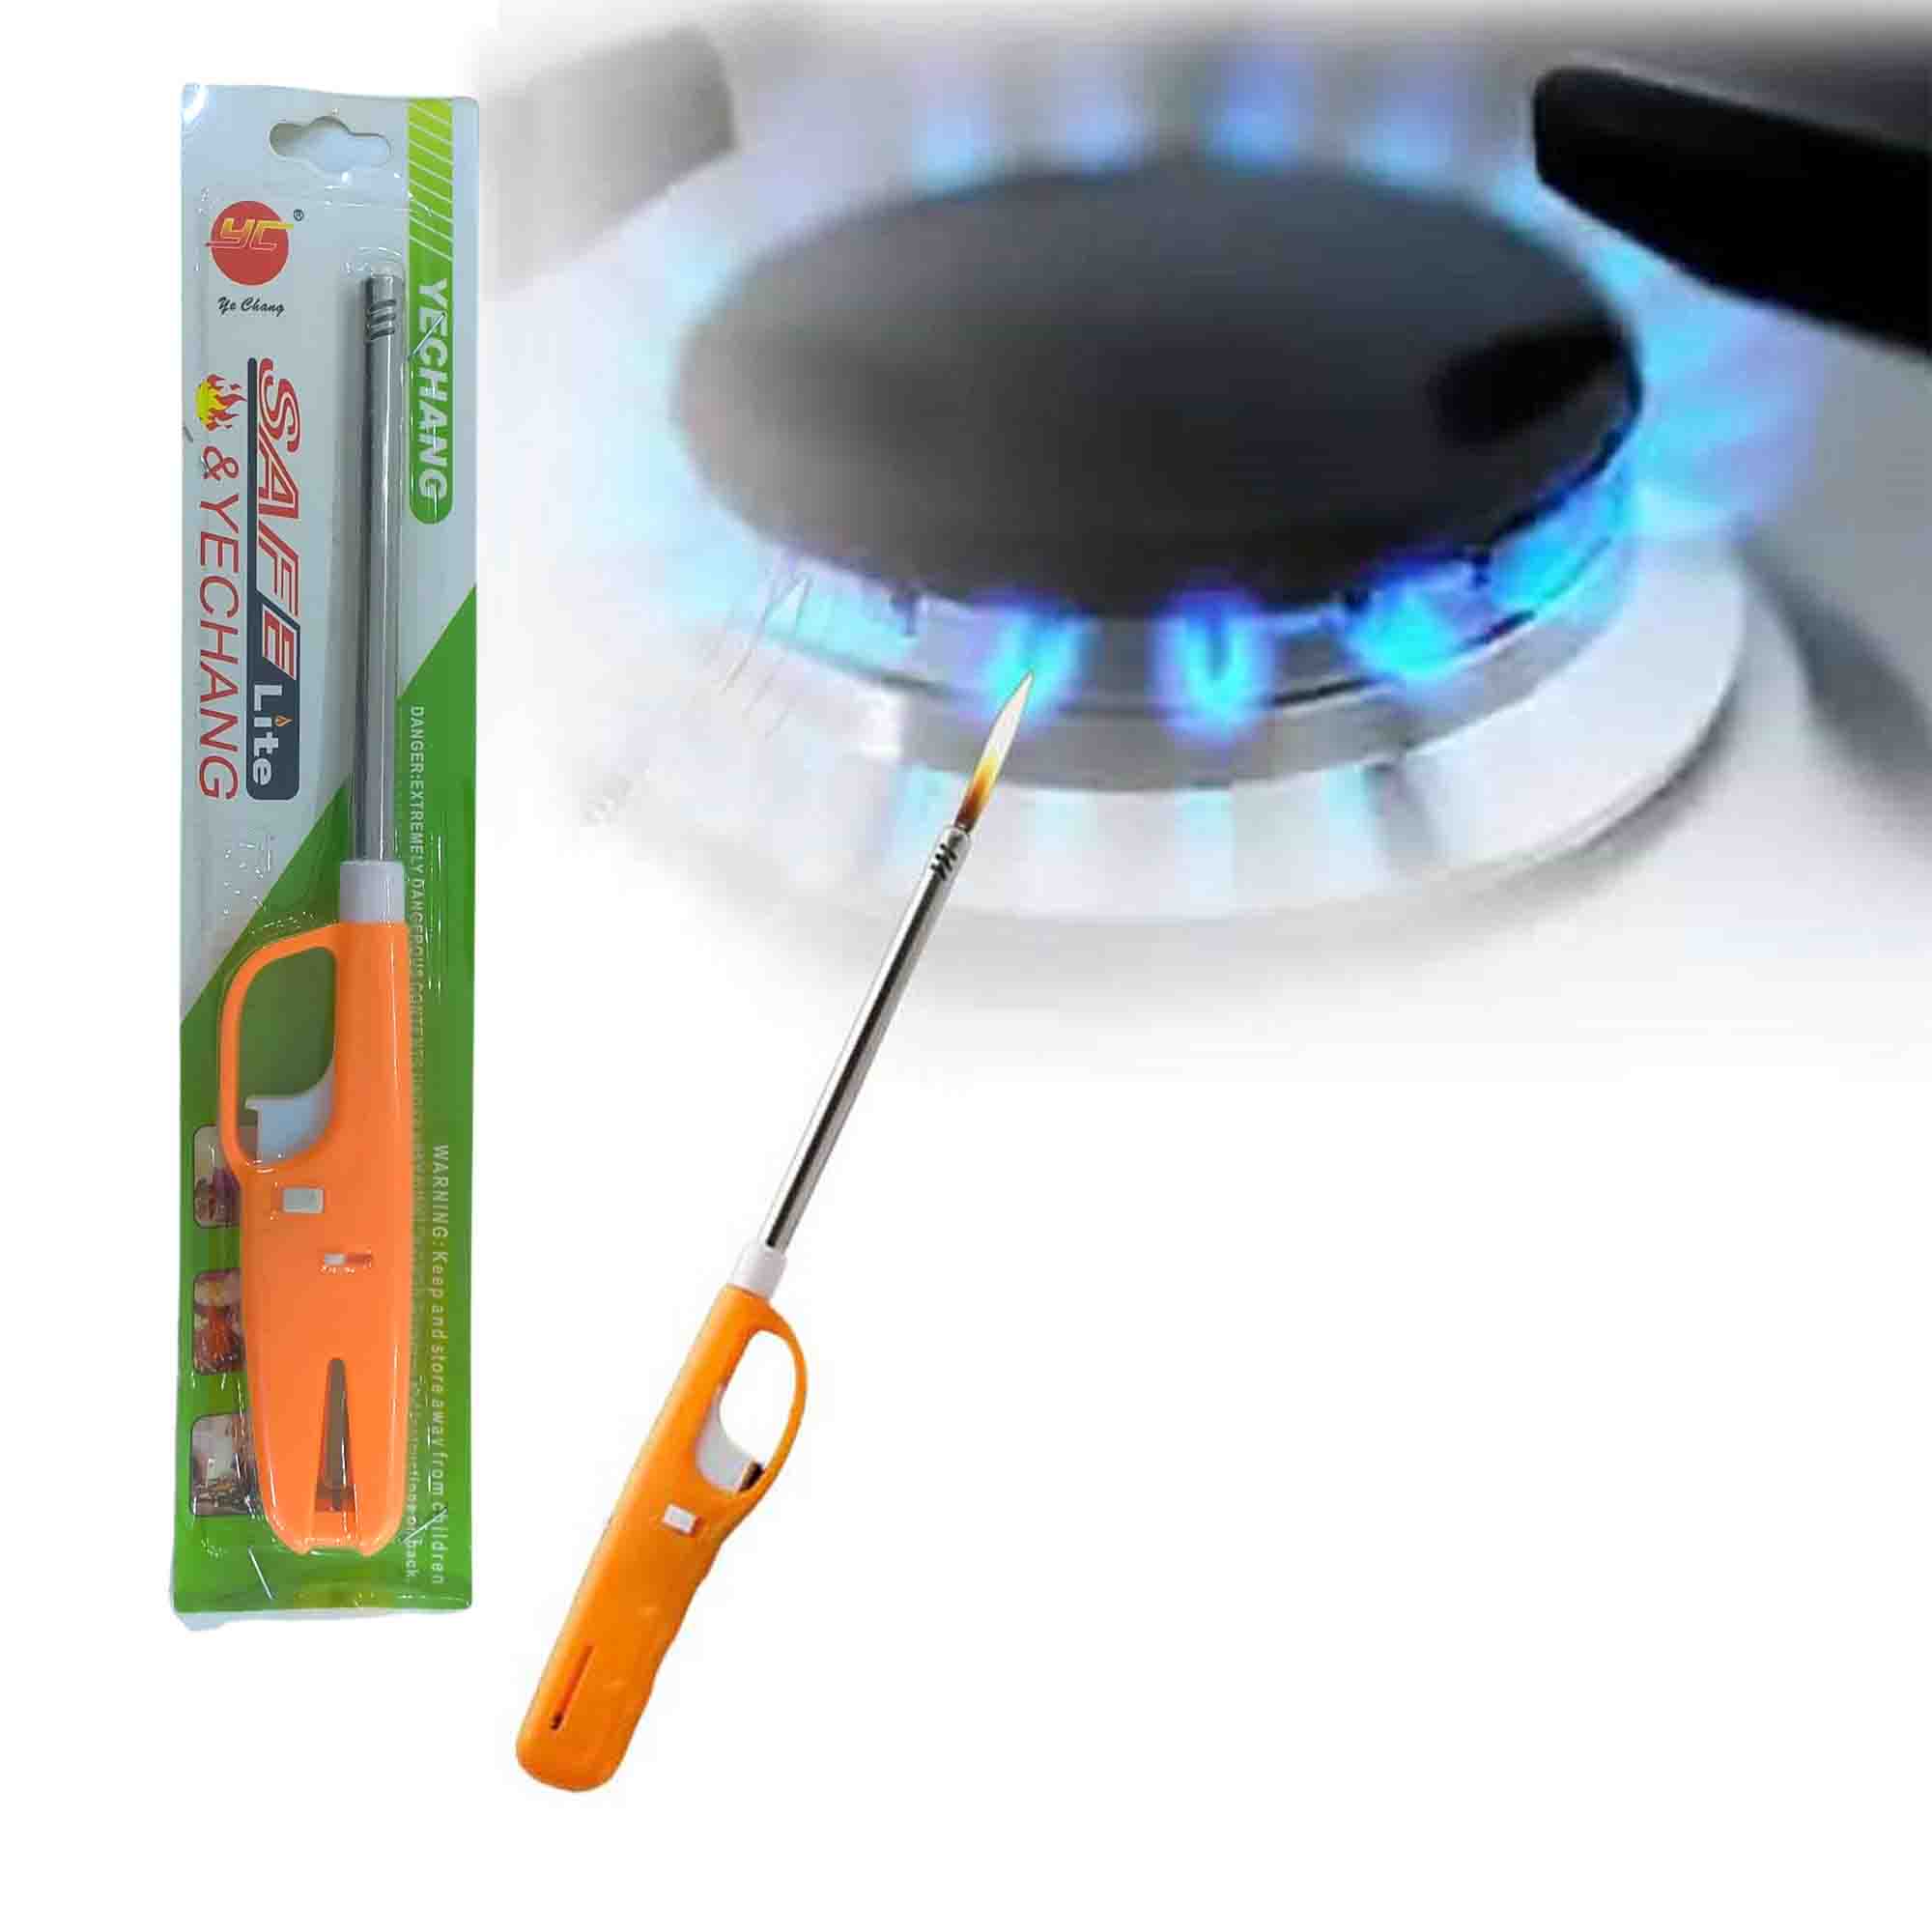 Multi purpose Igniter Gas Lighters For Cooking Specialty Kitchen Tools NowBuy.lk 3